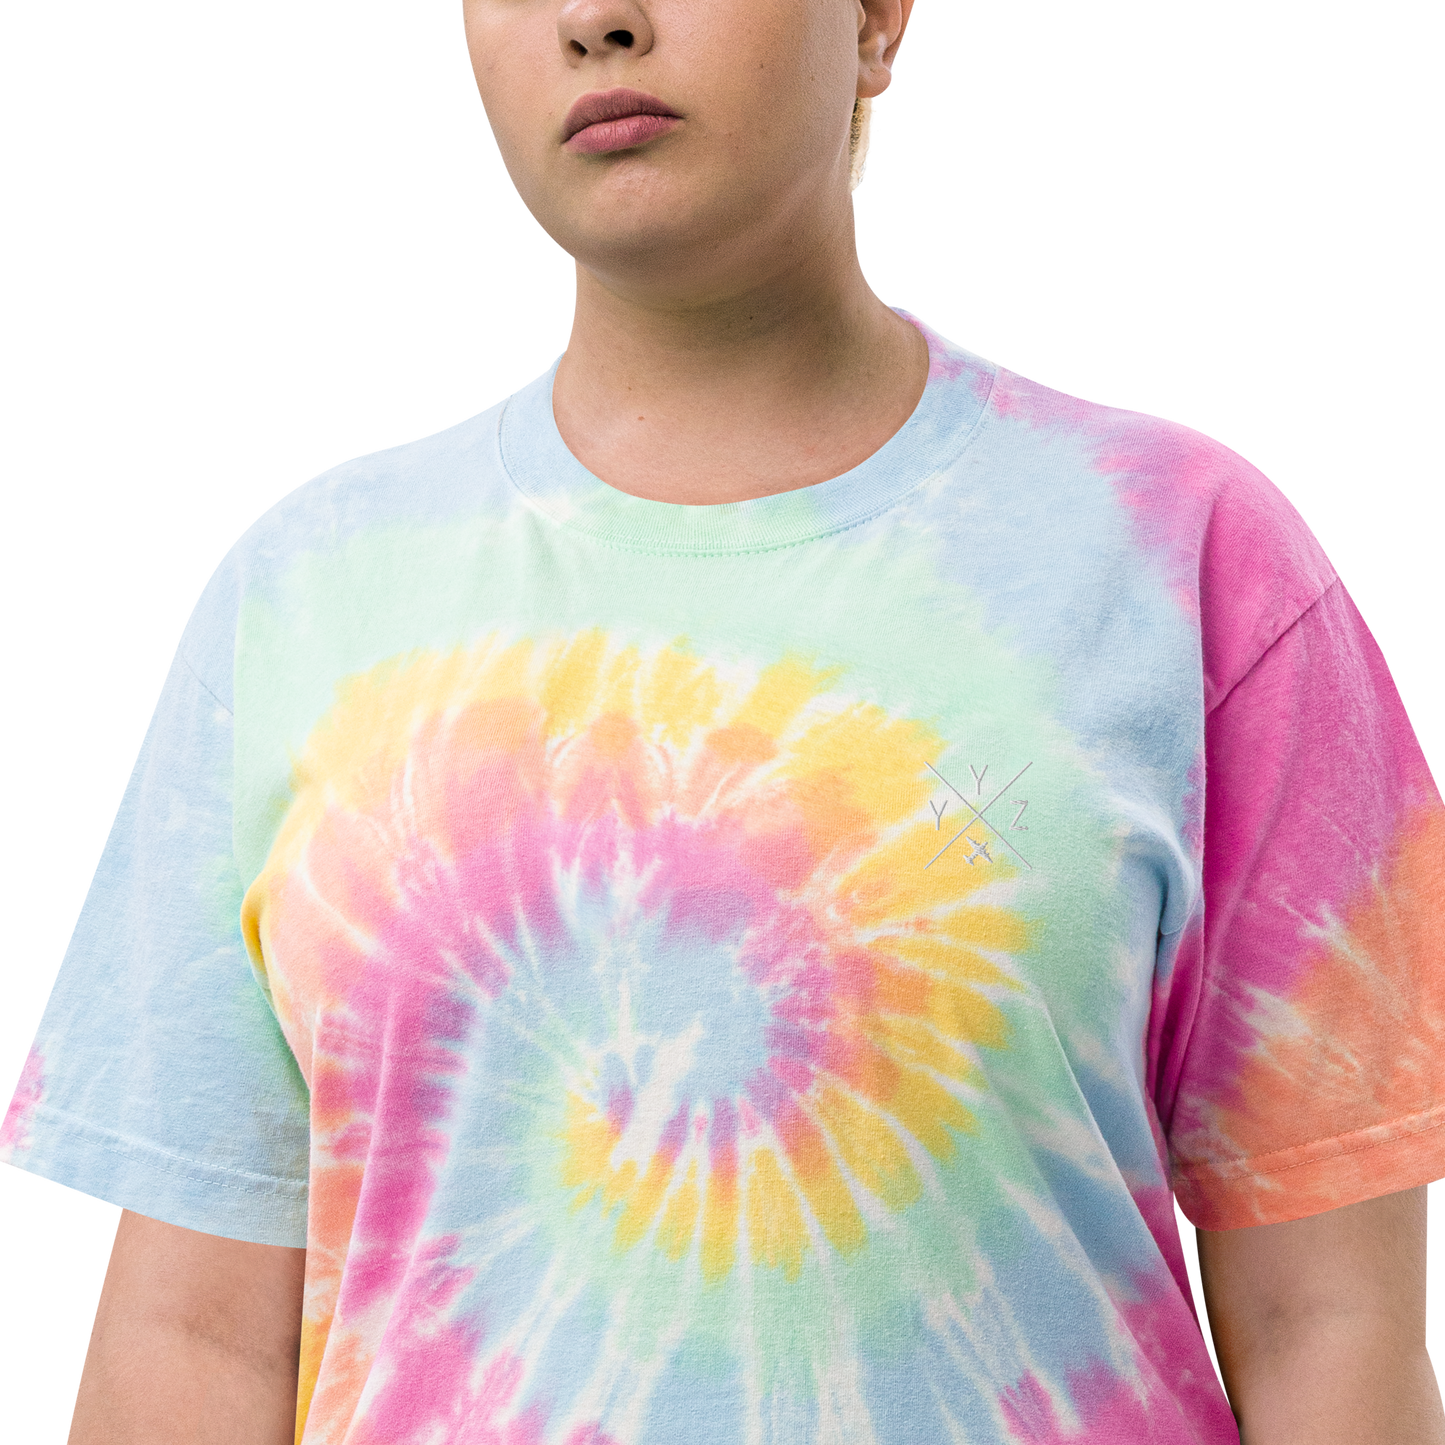 YHM Designs - YYZ Toronto Oversized Tie-Dye T-Shirt - Crossed-X Design with Airport Code and Vintage Propliner - White Embroidery - Image 13